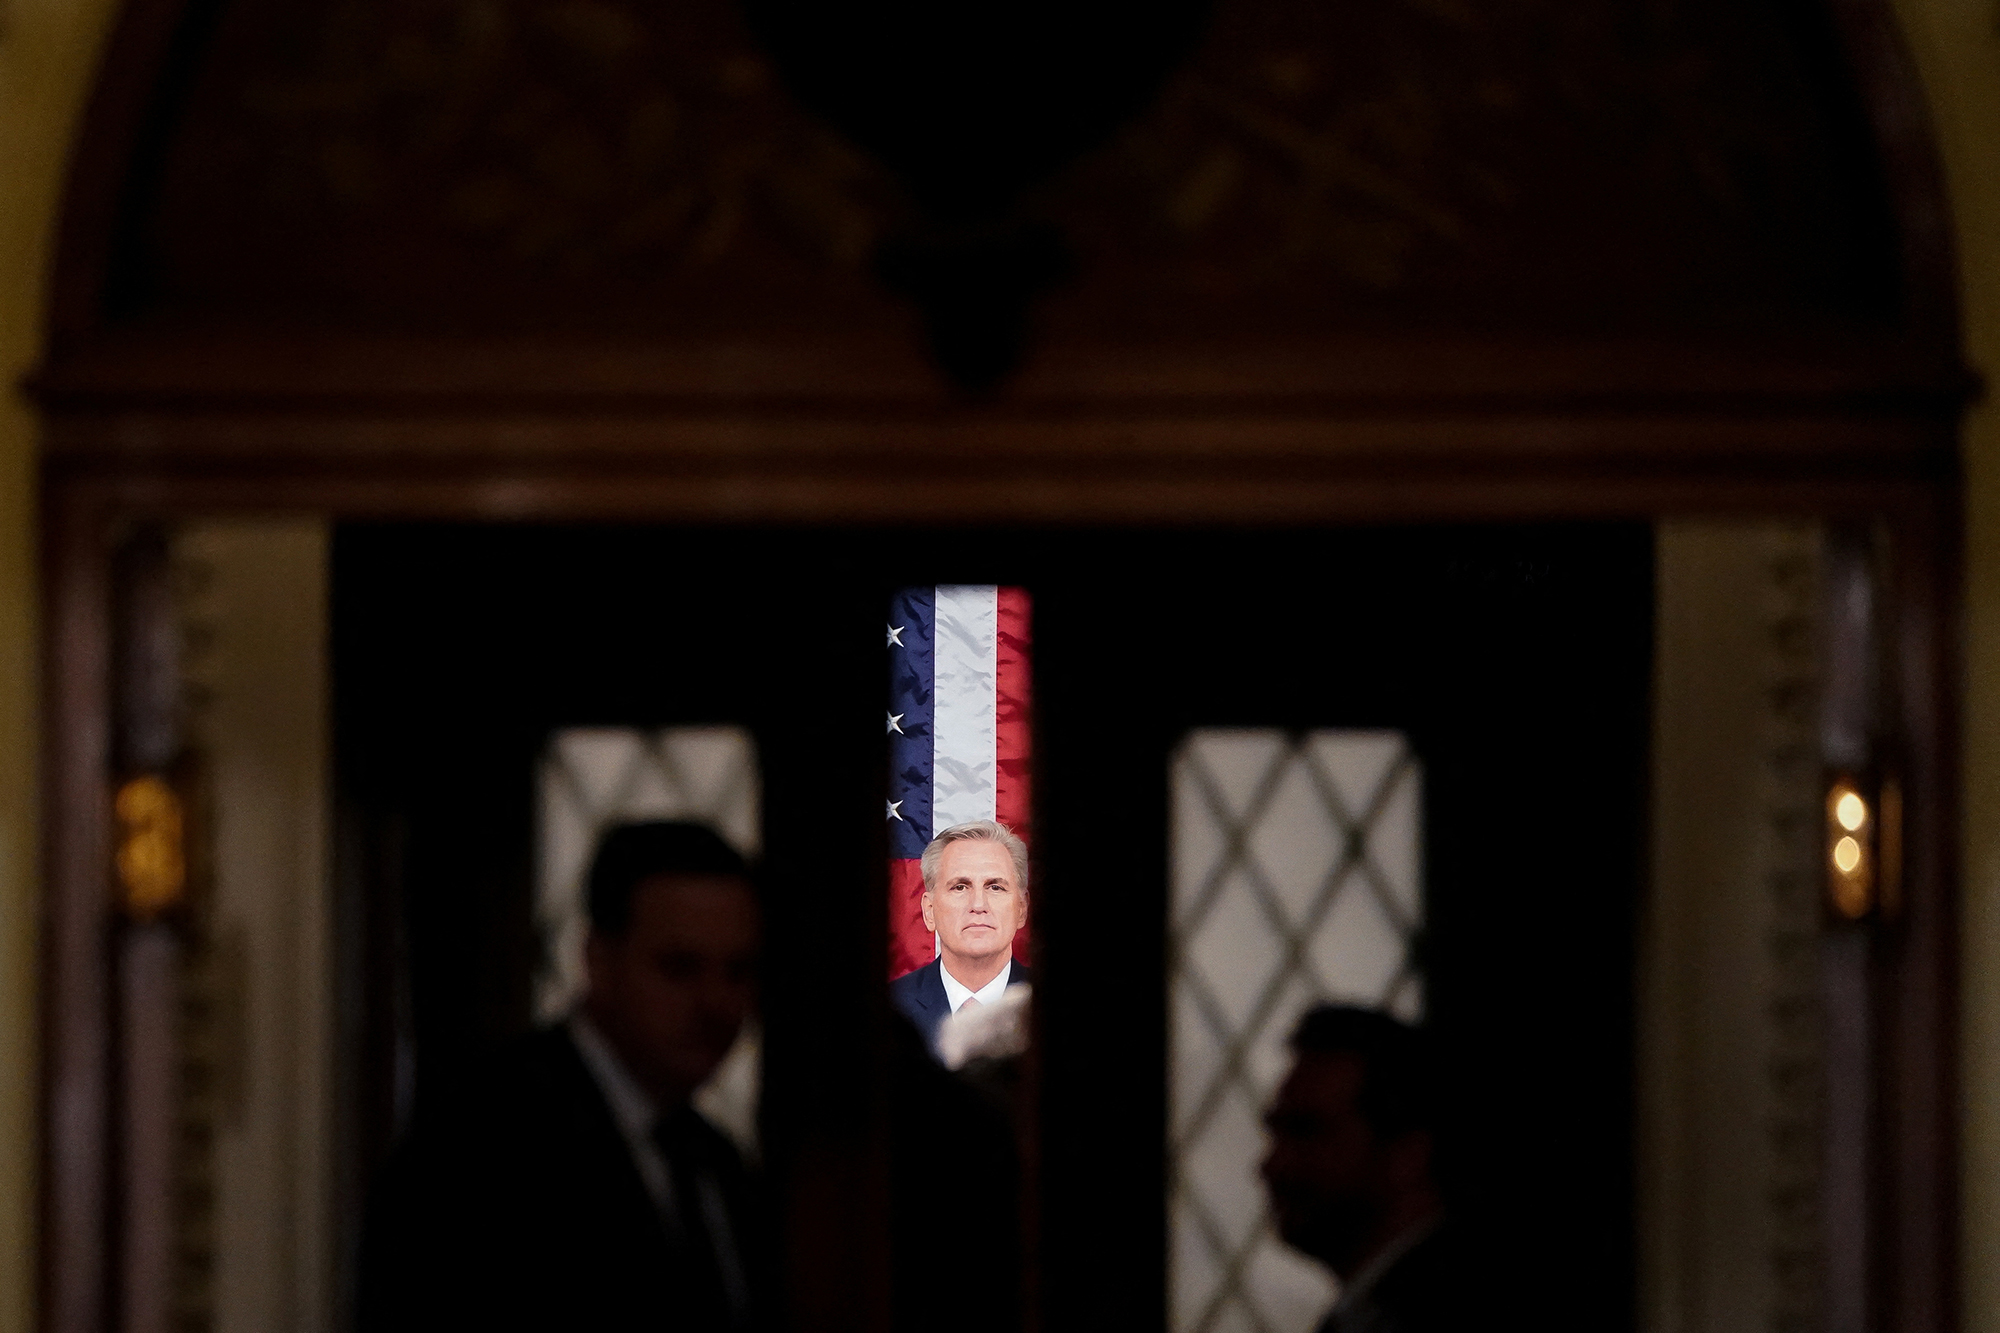 House Speaker Kevin McCarthy is seen as the doors to the House Chamber are closed ahead of U.S. President Joe Biden’s State of the Union Address.